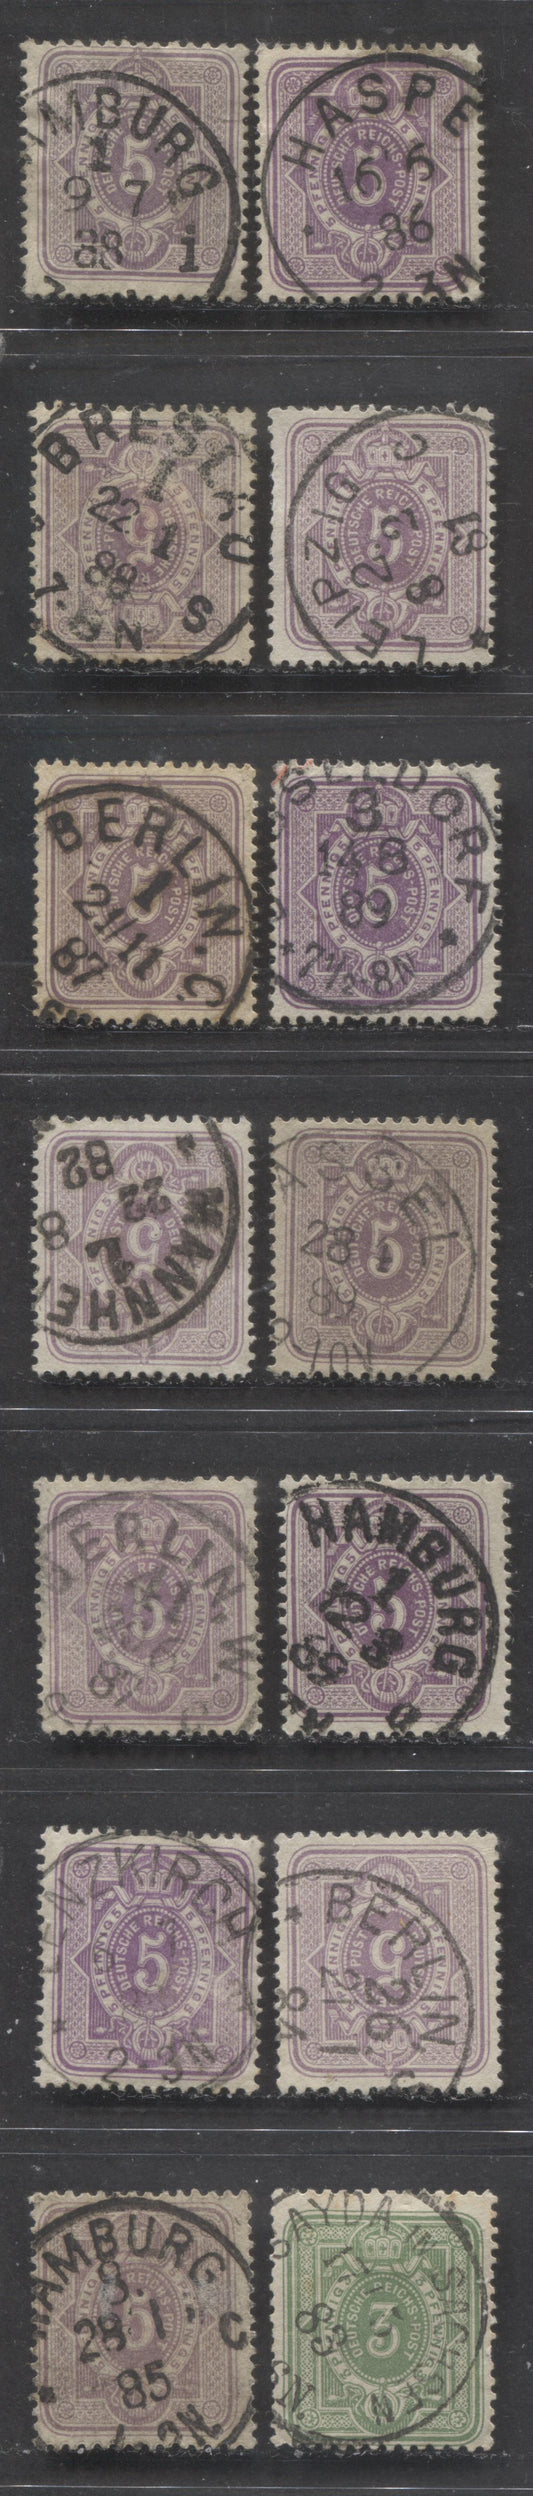 Lot 423 Germany SC#37-38 1880-1883 Numeral & Eagle Pfenning Issue, All With SON Town Cancels, 14 Fine & VF Used Singles, Click on Listing to See ALL Pictures, Estimated Value $15